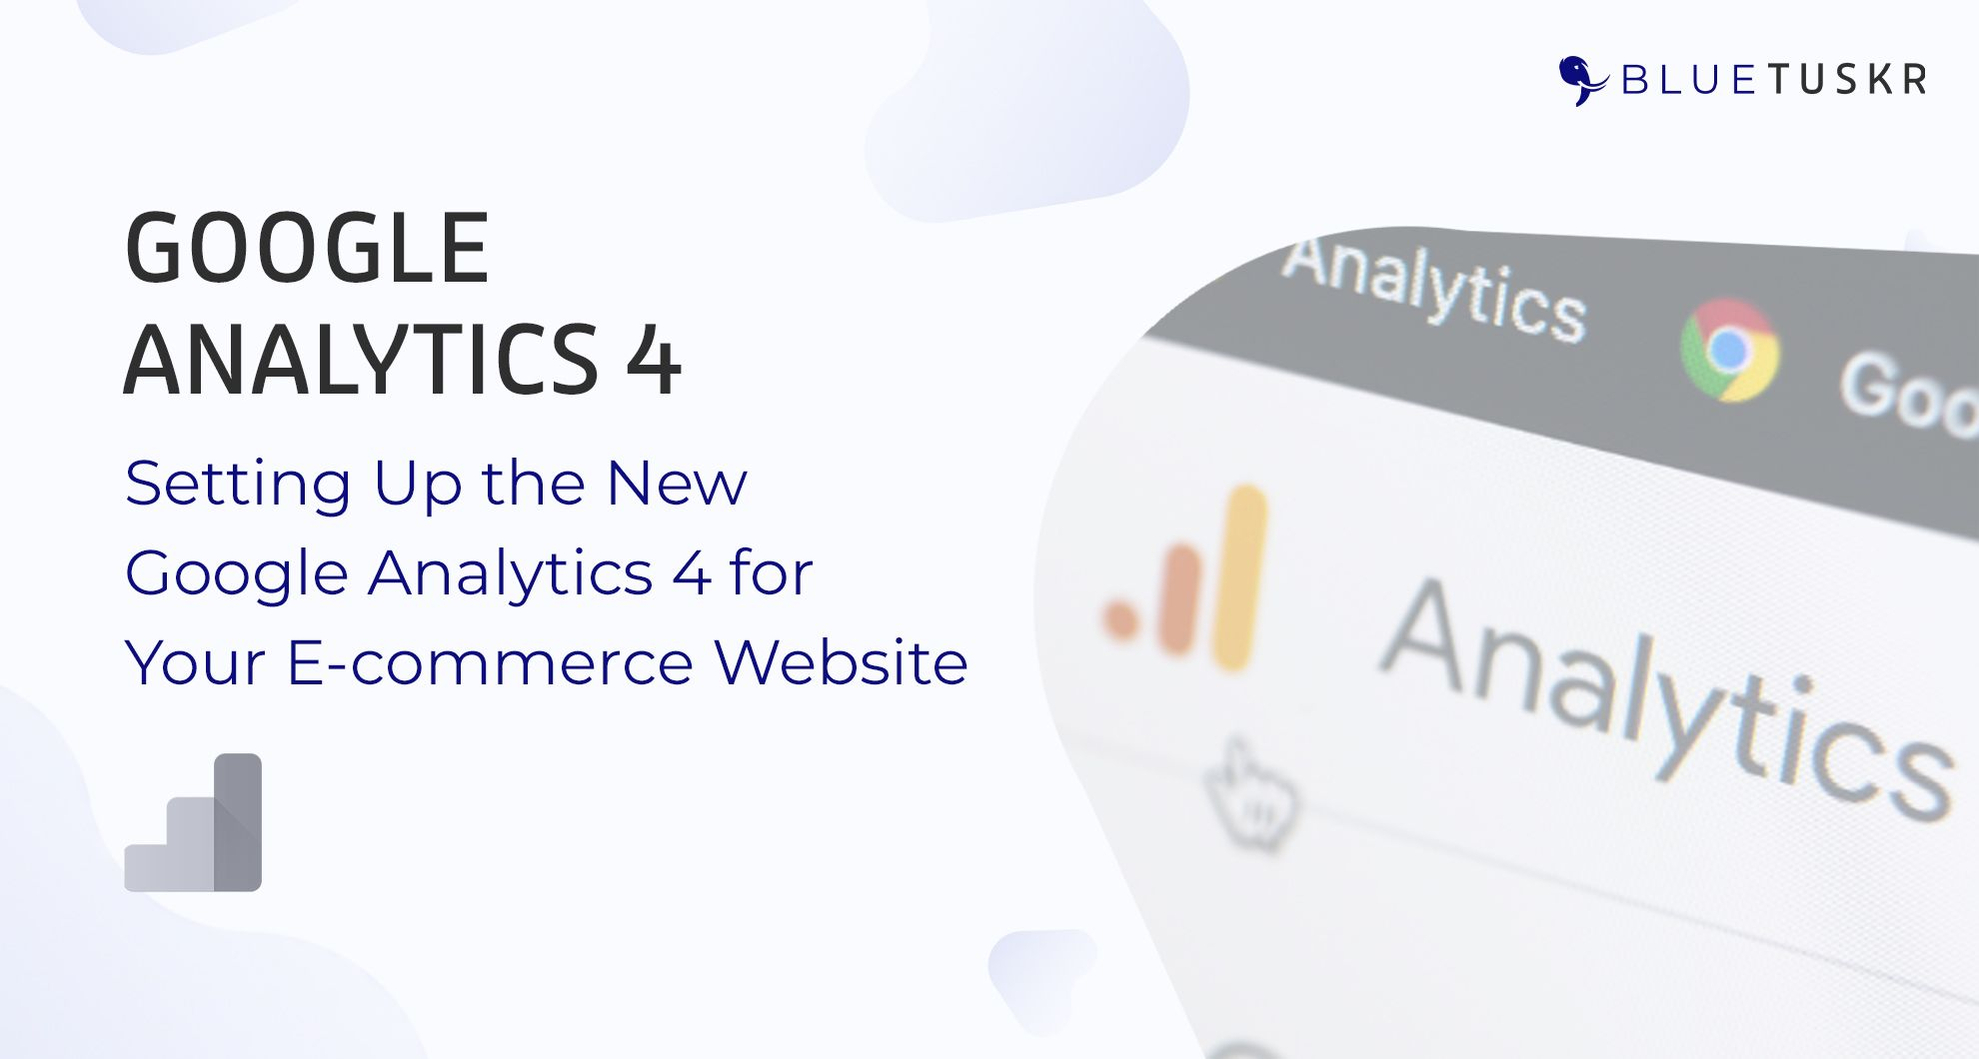 Setting Up the New Google Analytics 4 for Your E-commerce Website